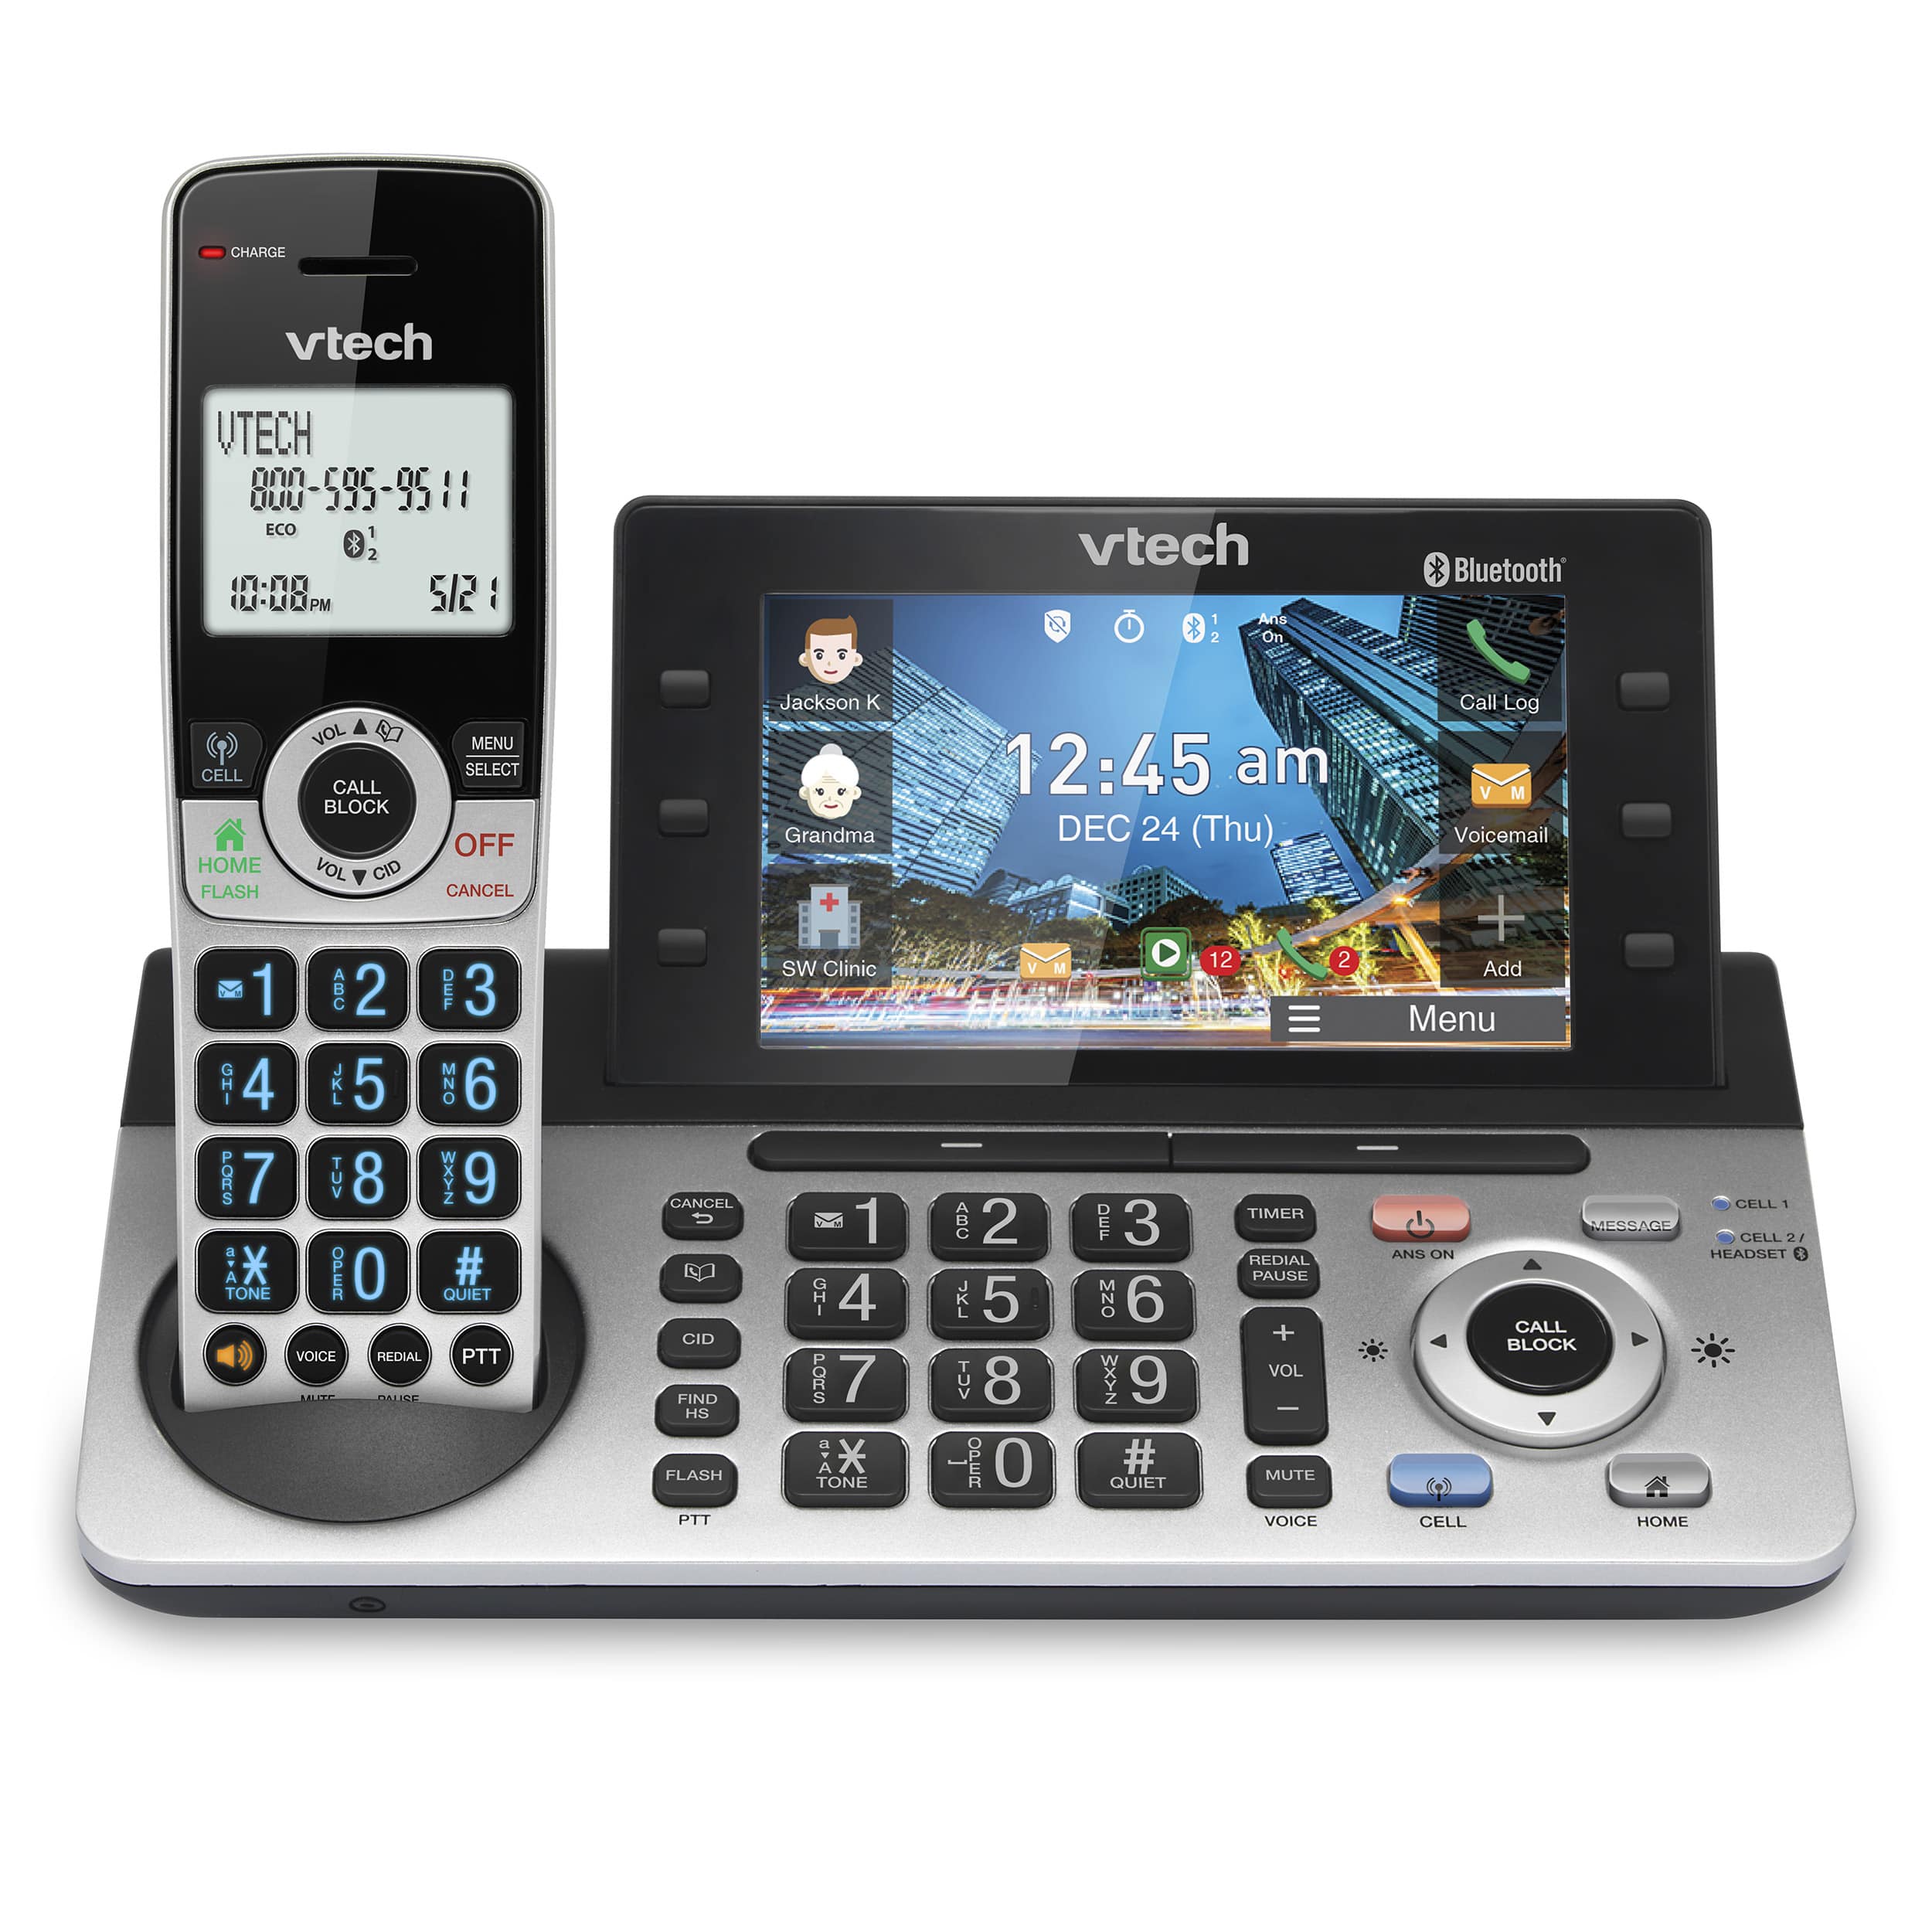 Expandable Cordless Phone with Bluetooth Connect to Cell, Smart Call Blocker, Answering System, and 5" Color Base Display - view 1